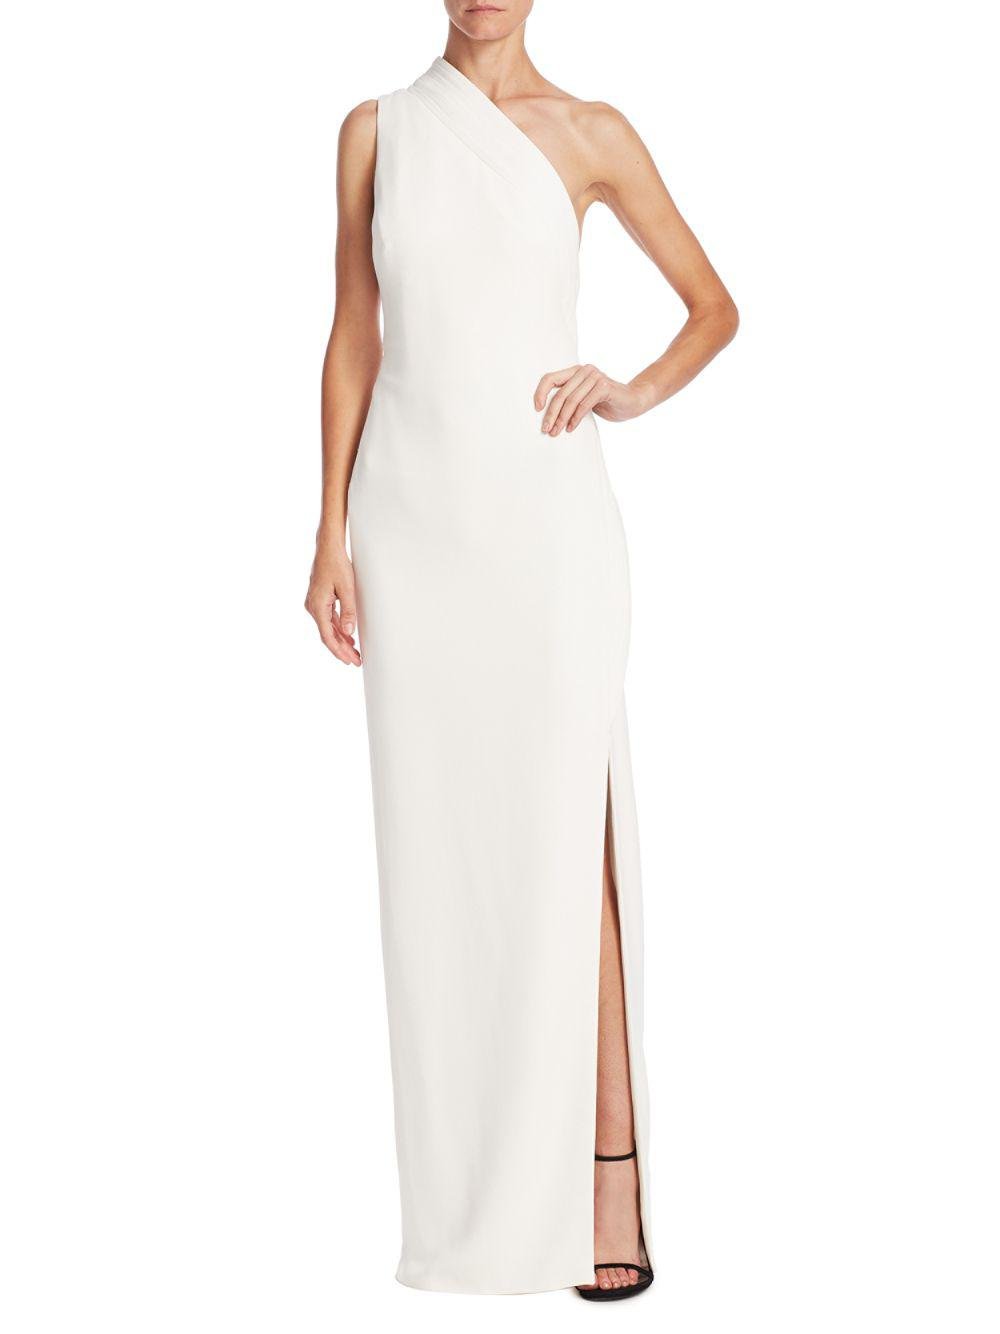 Brandon Maxwell Synthetic One-shoulder Gown in Ivory (White) - Lyst